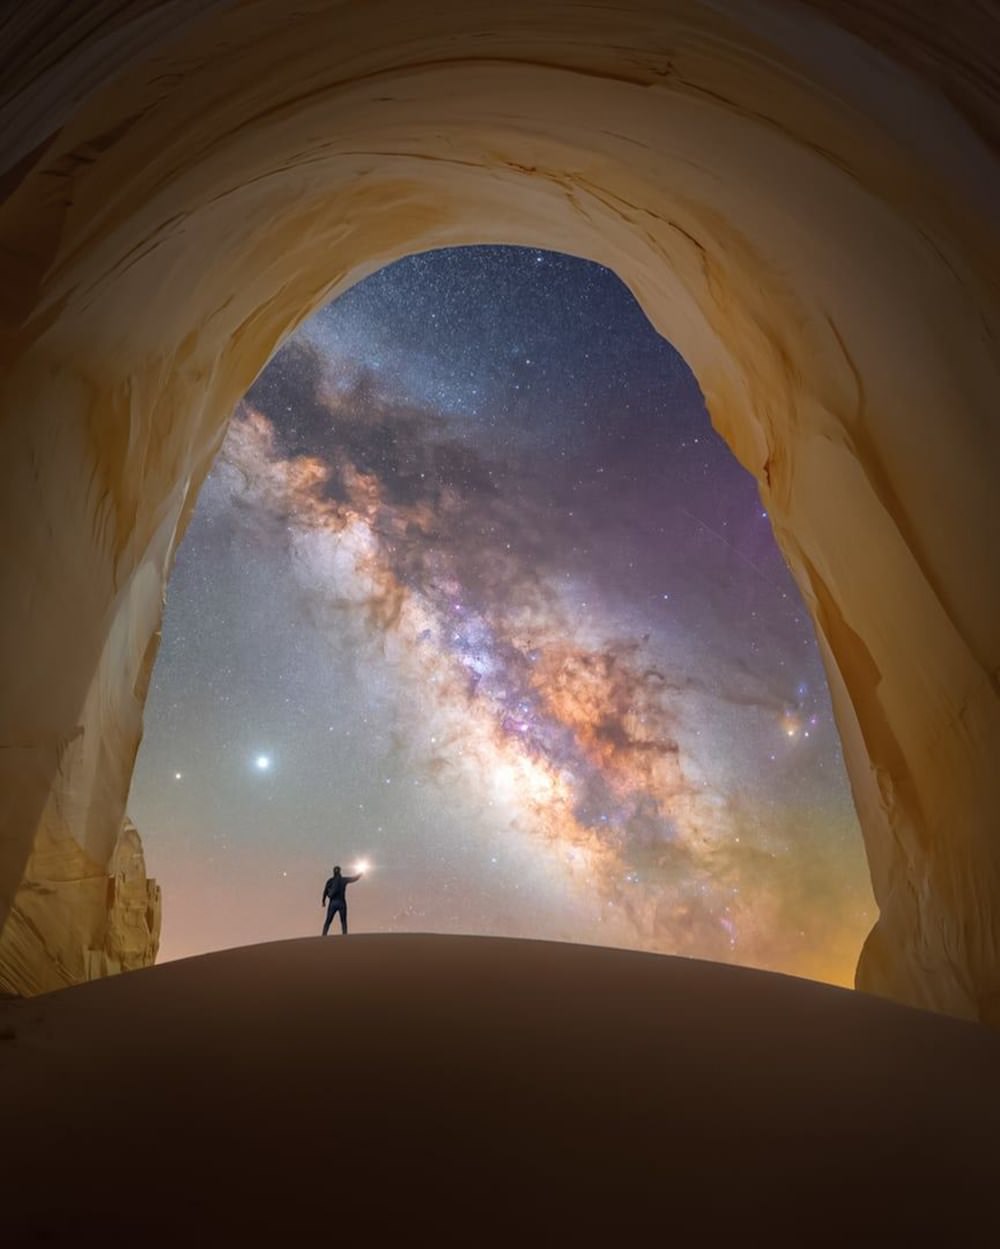 Hall of Light / Spencer Welling / Utah, USA / 2021 Milky Way Photographer of the Year